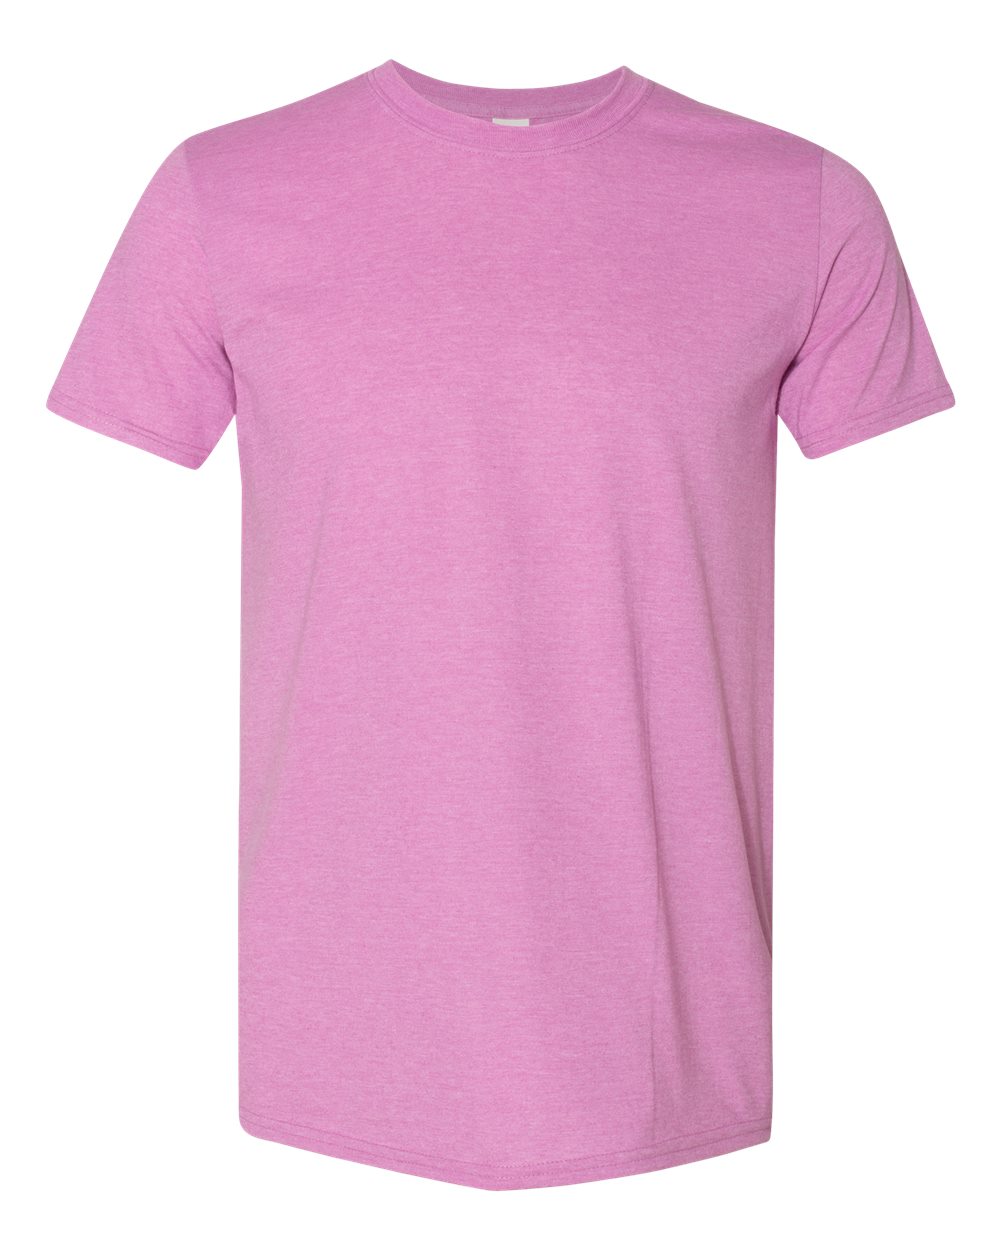 Gildan Softstyle Tee (64000) in Heather Radiant Orchid